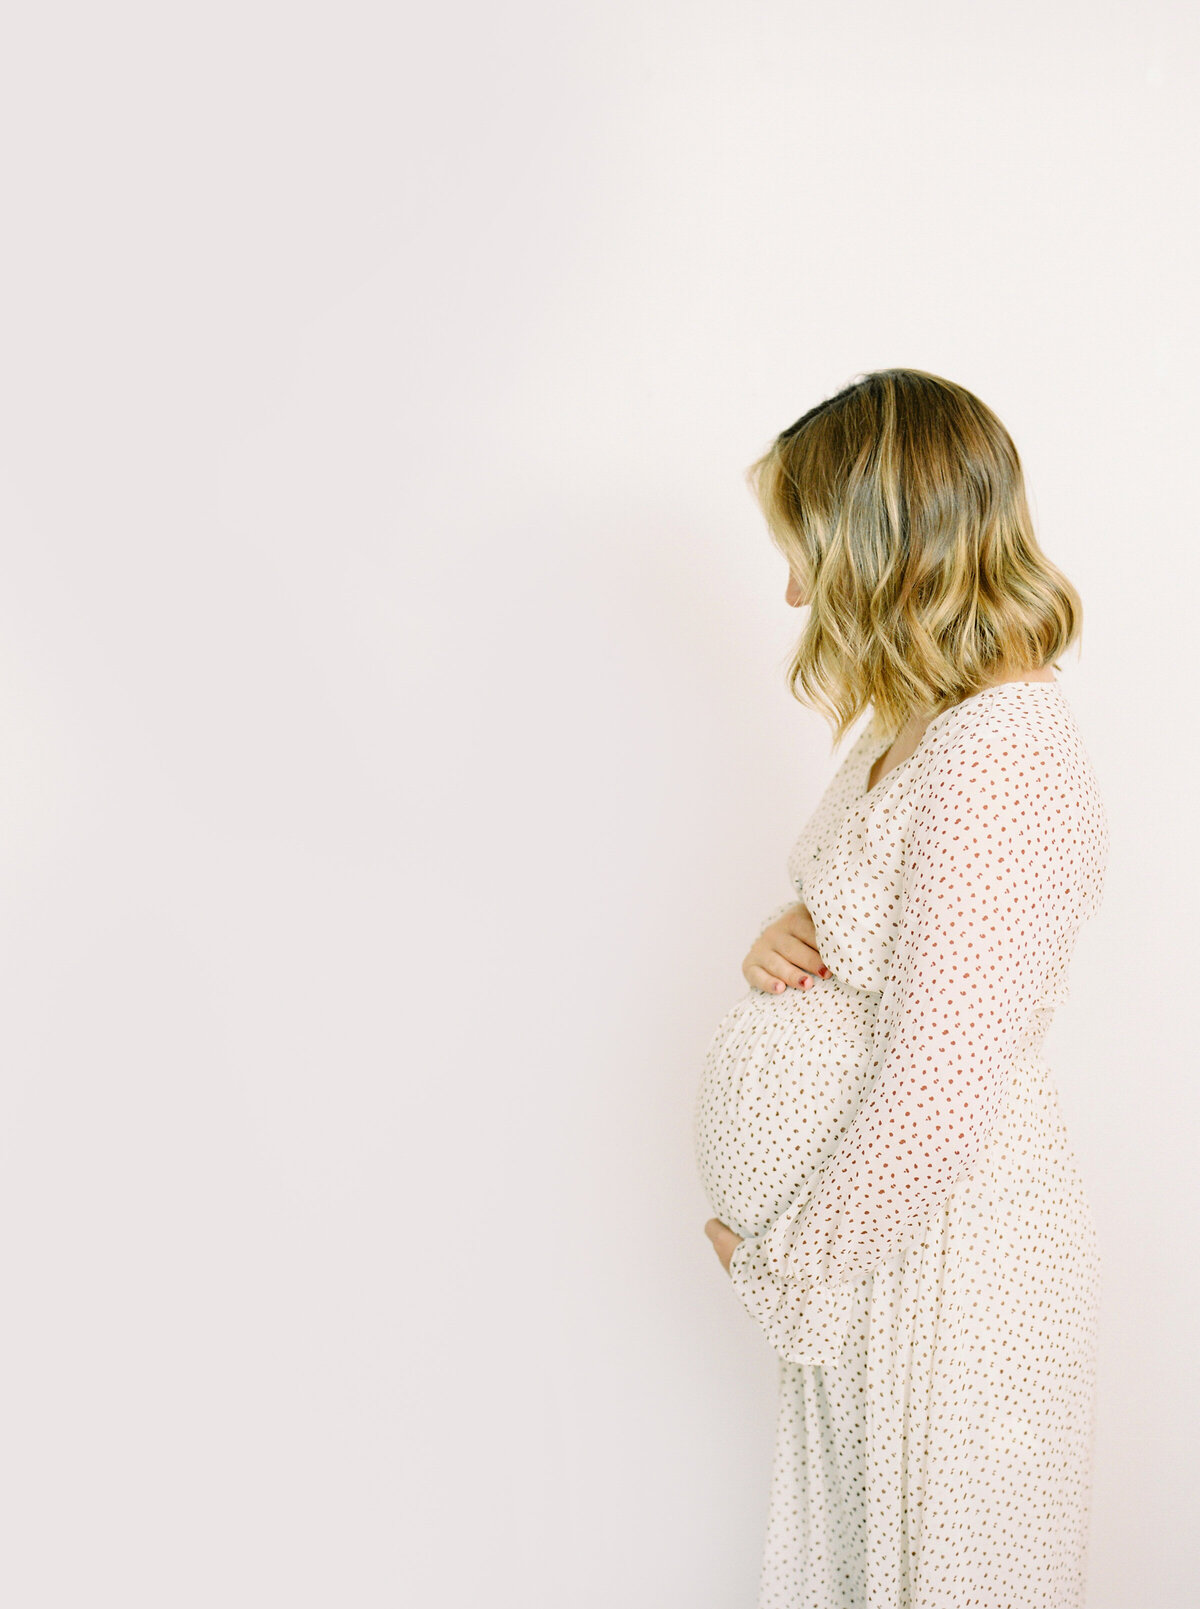 haute-stock-photography-subscription-baby-bump-collection-final-19